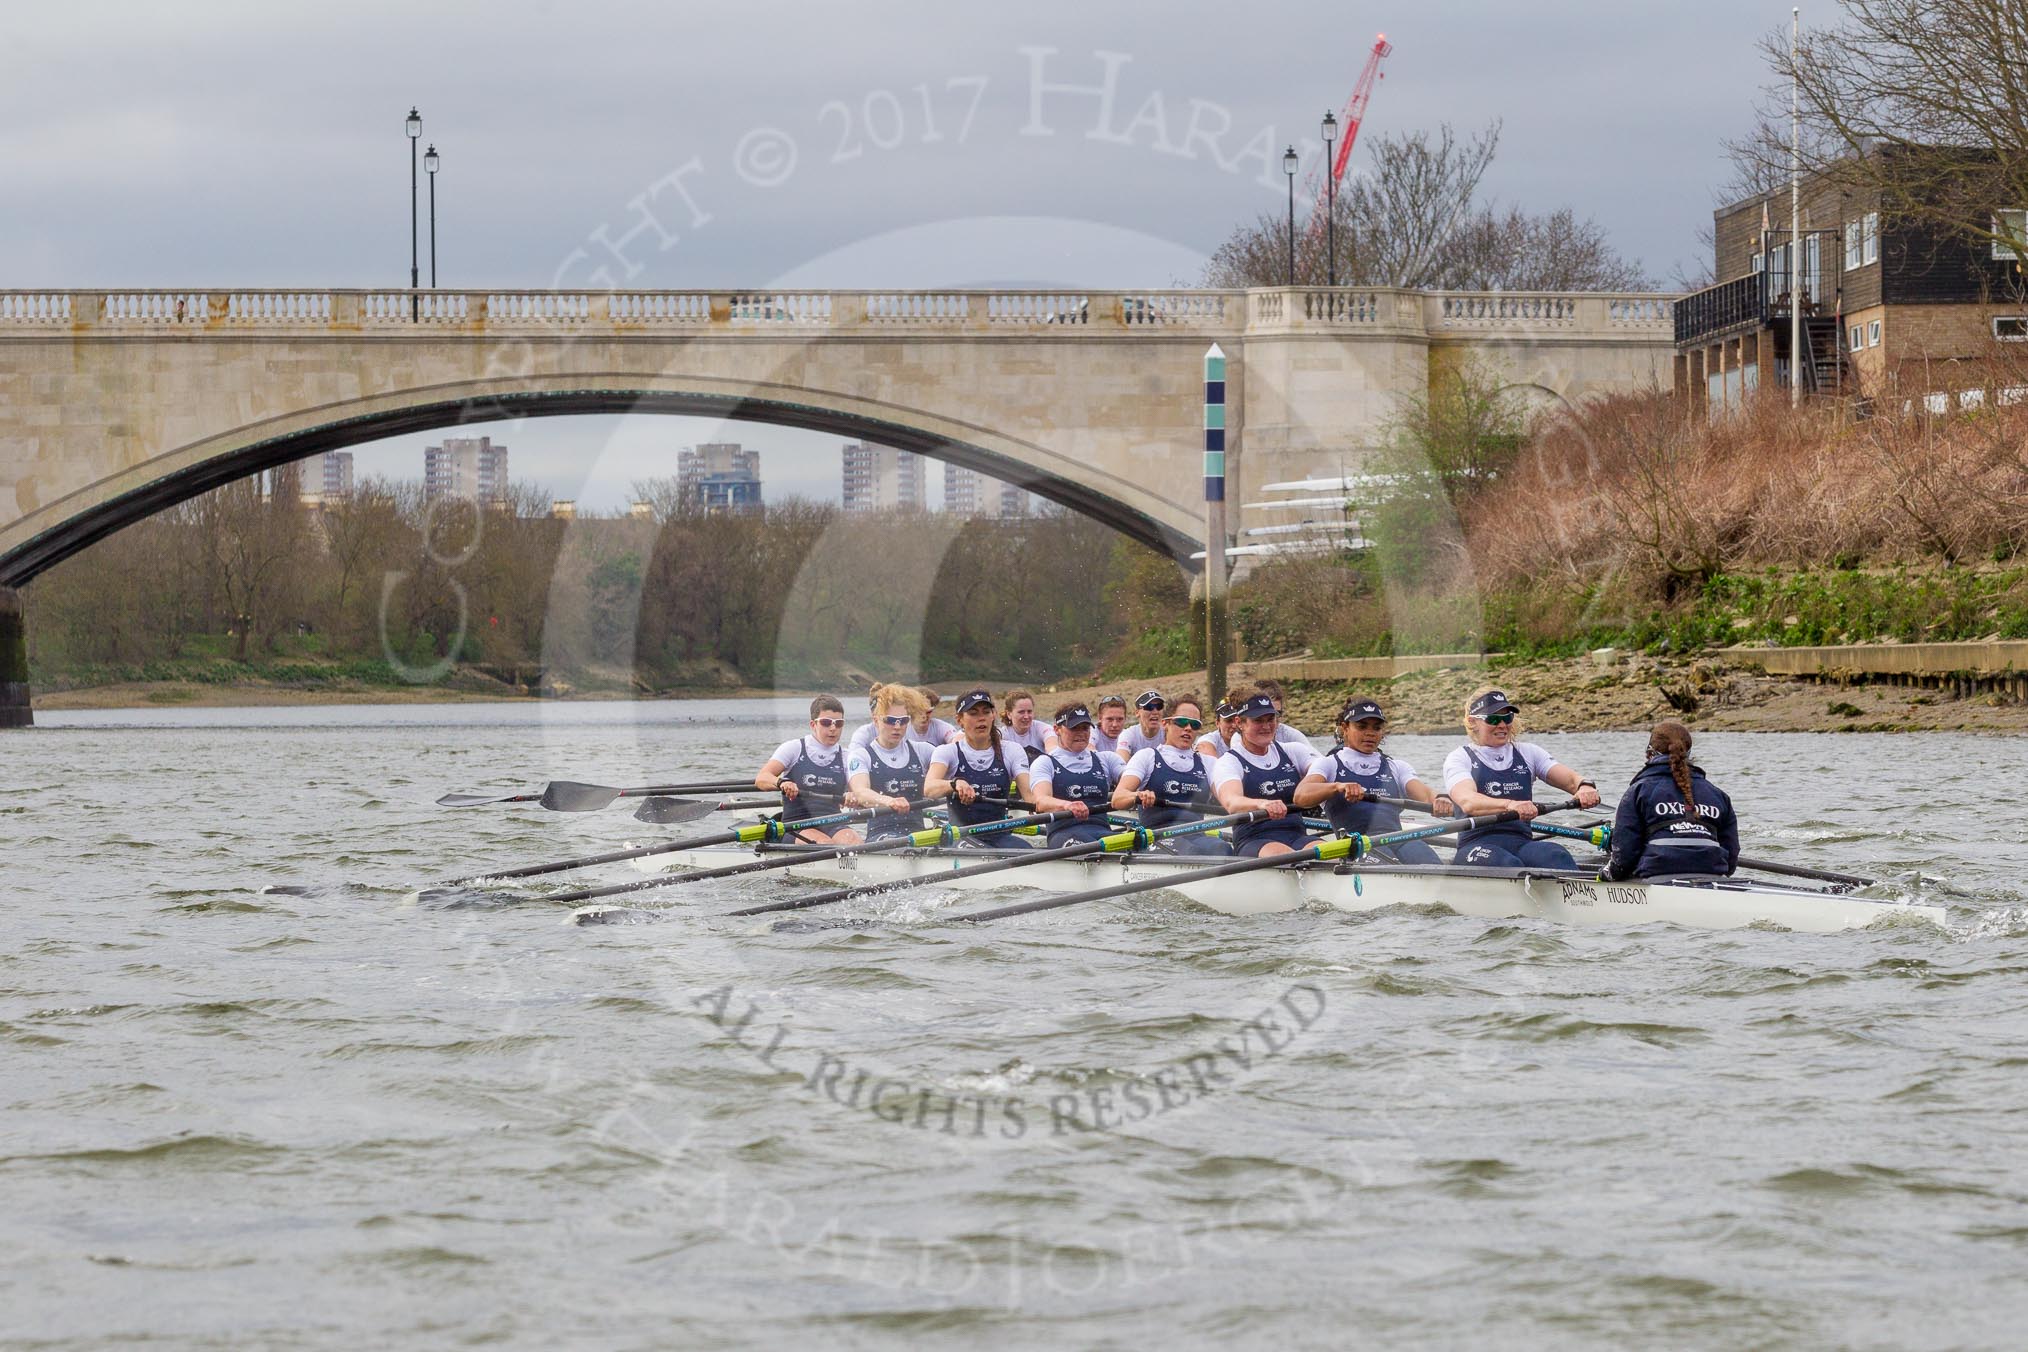 The Cancer Research UK Boat Race season 2017 - Women's Boat Race Fixture OUWBC vs Molesey BC: OUWBC working hard to catch up with Molesey - 3 Rebecca Te Water Naude, 4 Rebecca Esselstein, 5 Chloe Laverack, 6 Harriet Austin, 7 Jenna Hebert, stroke Emily Cameron.
River Thames between Putney Bridge and Mortlake,
London SW15,

United Kingdom,
on 19 March 2017 at 16:25, image #159